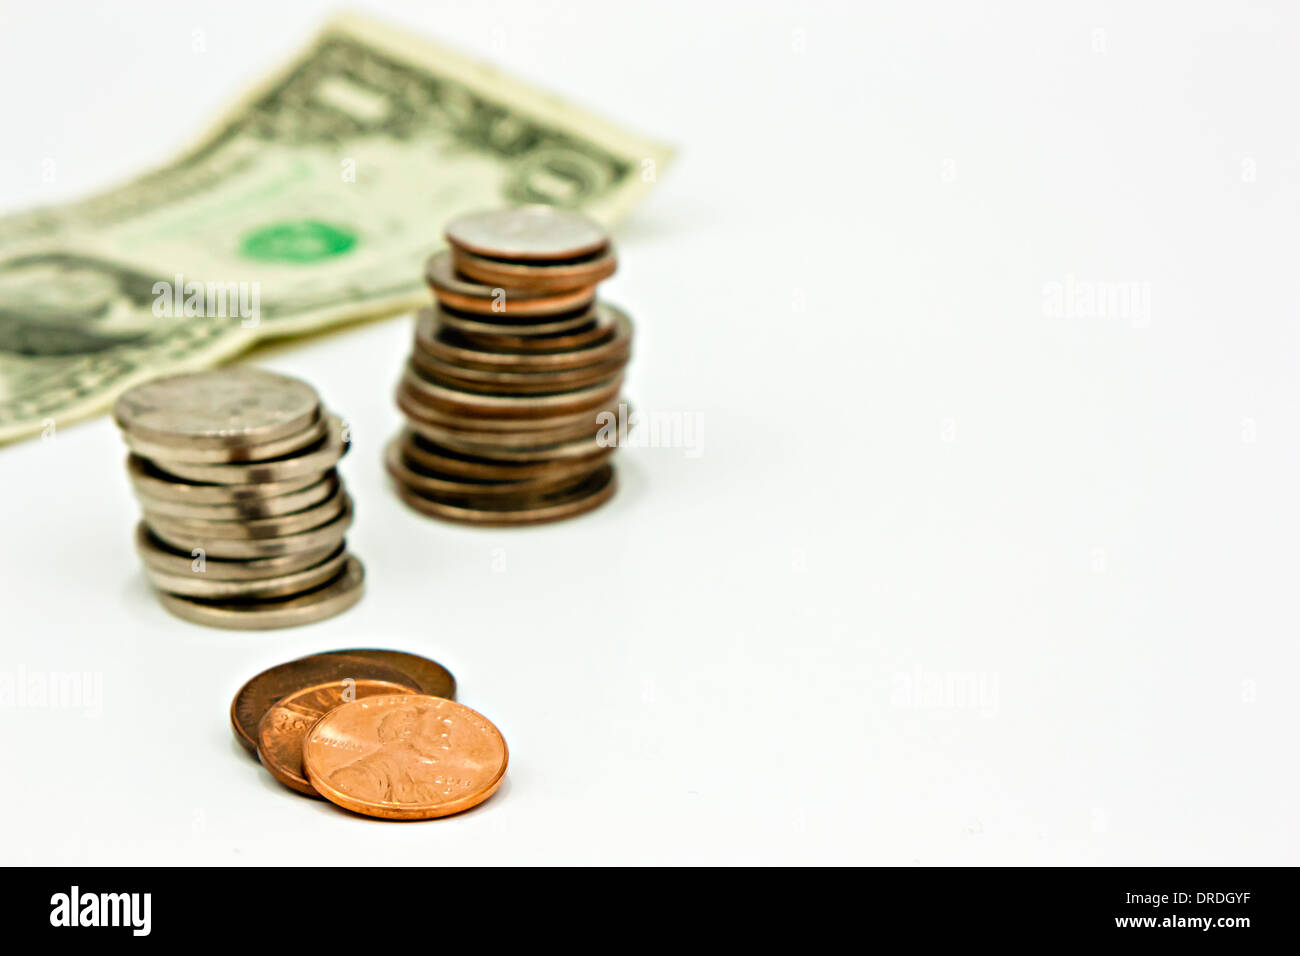 Money stacked on white, nickels, dimes, quarters, pennies, dollar bill. US currency. Stock Photo